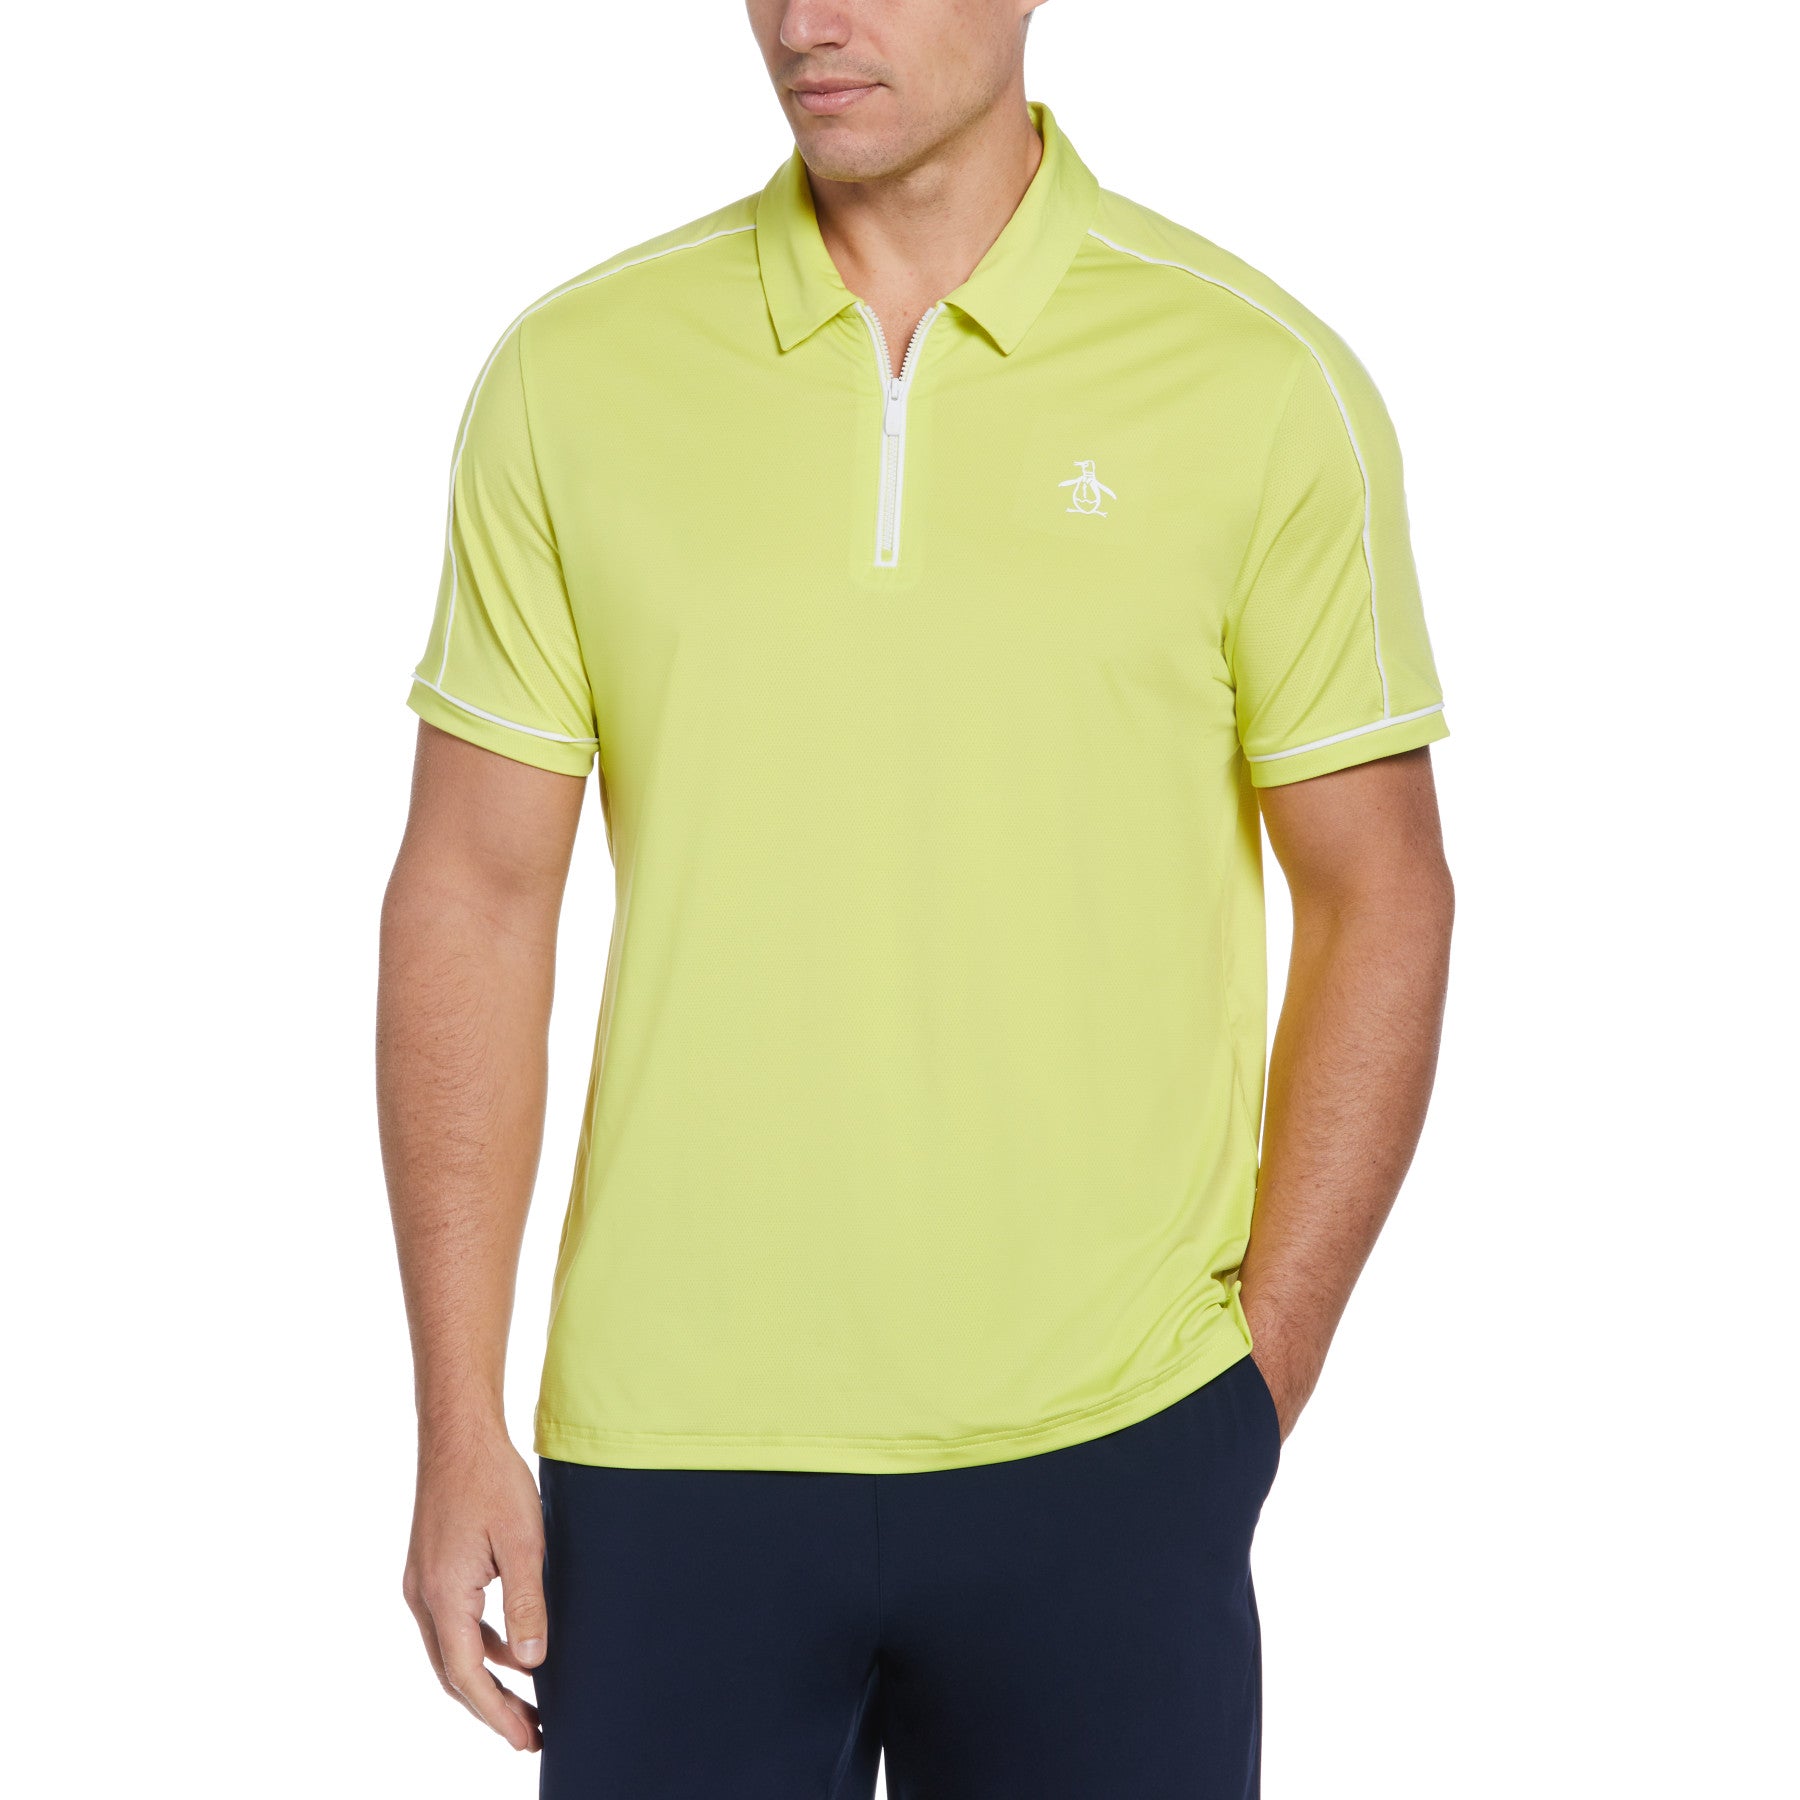 View Piped Performance Quarter Zip Tennis Polo Shirt In Limeade information